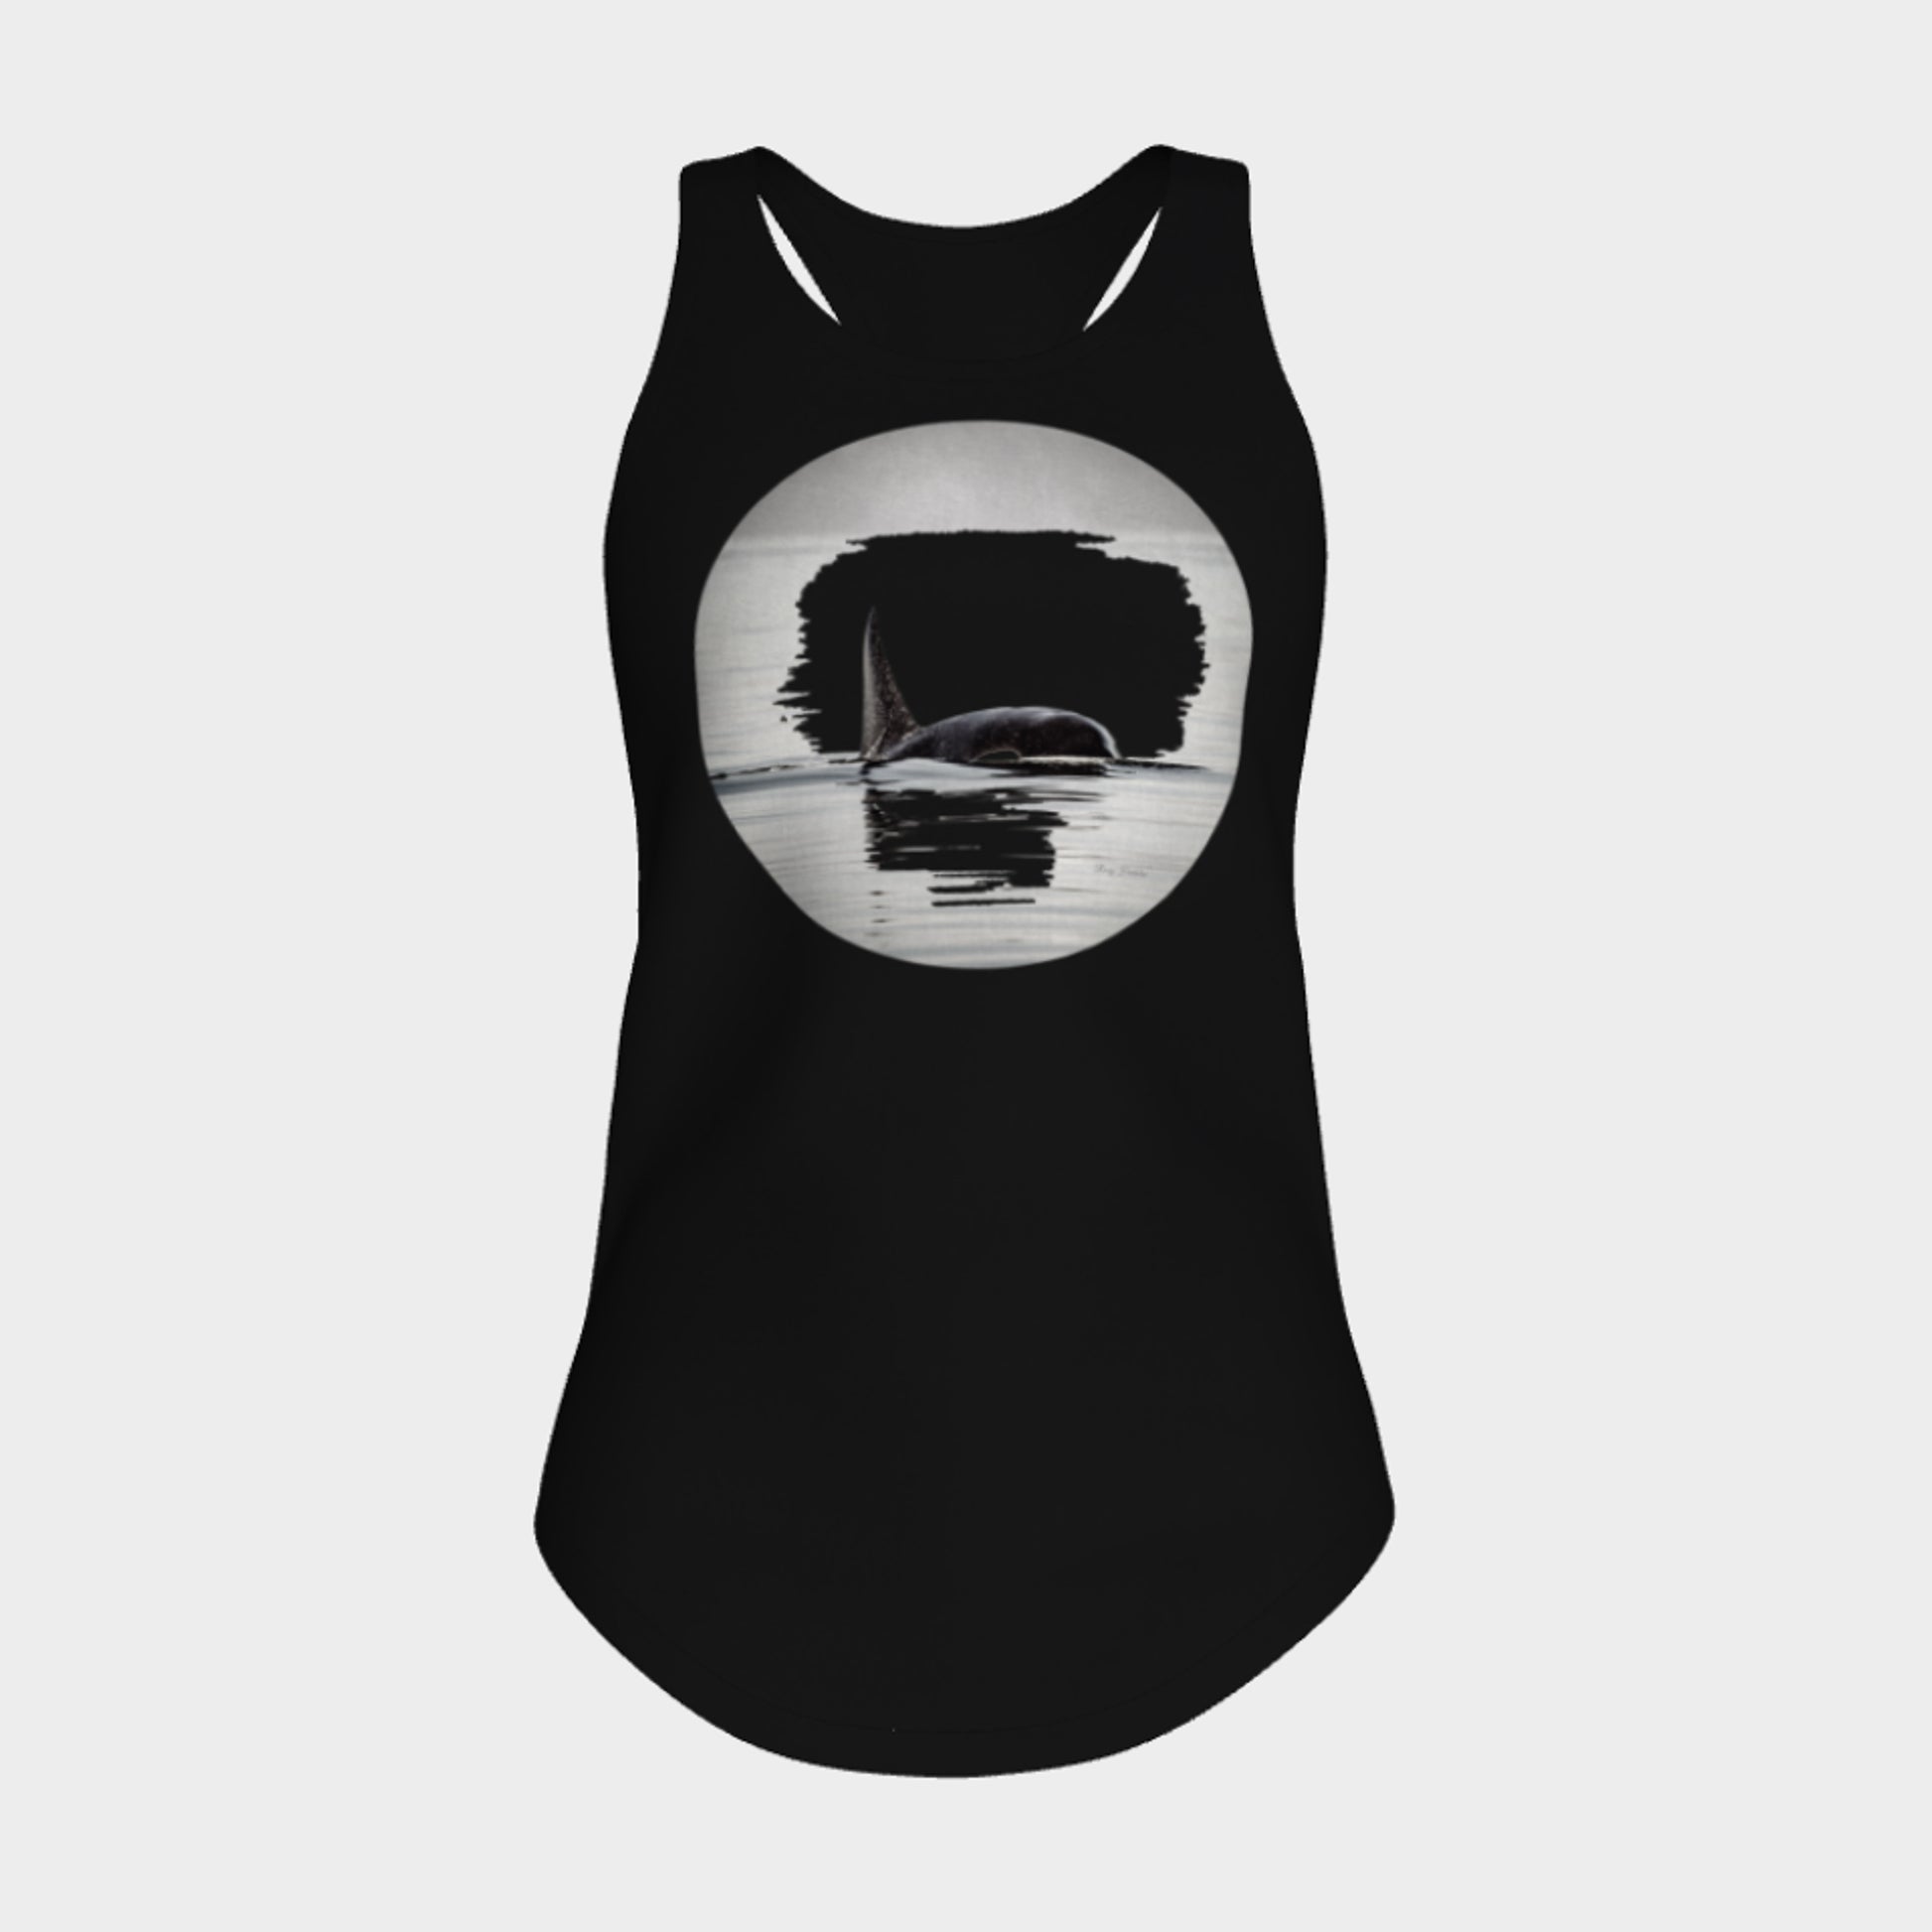 Orca Spray Racerback Tank Top  Excellent choice for the summer or for working out. 